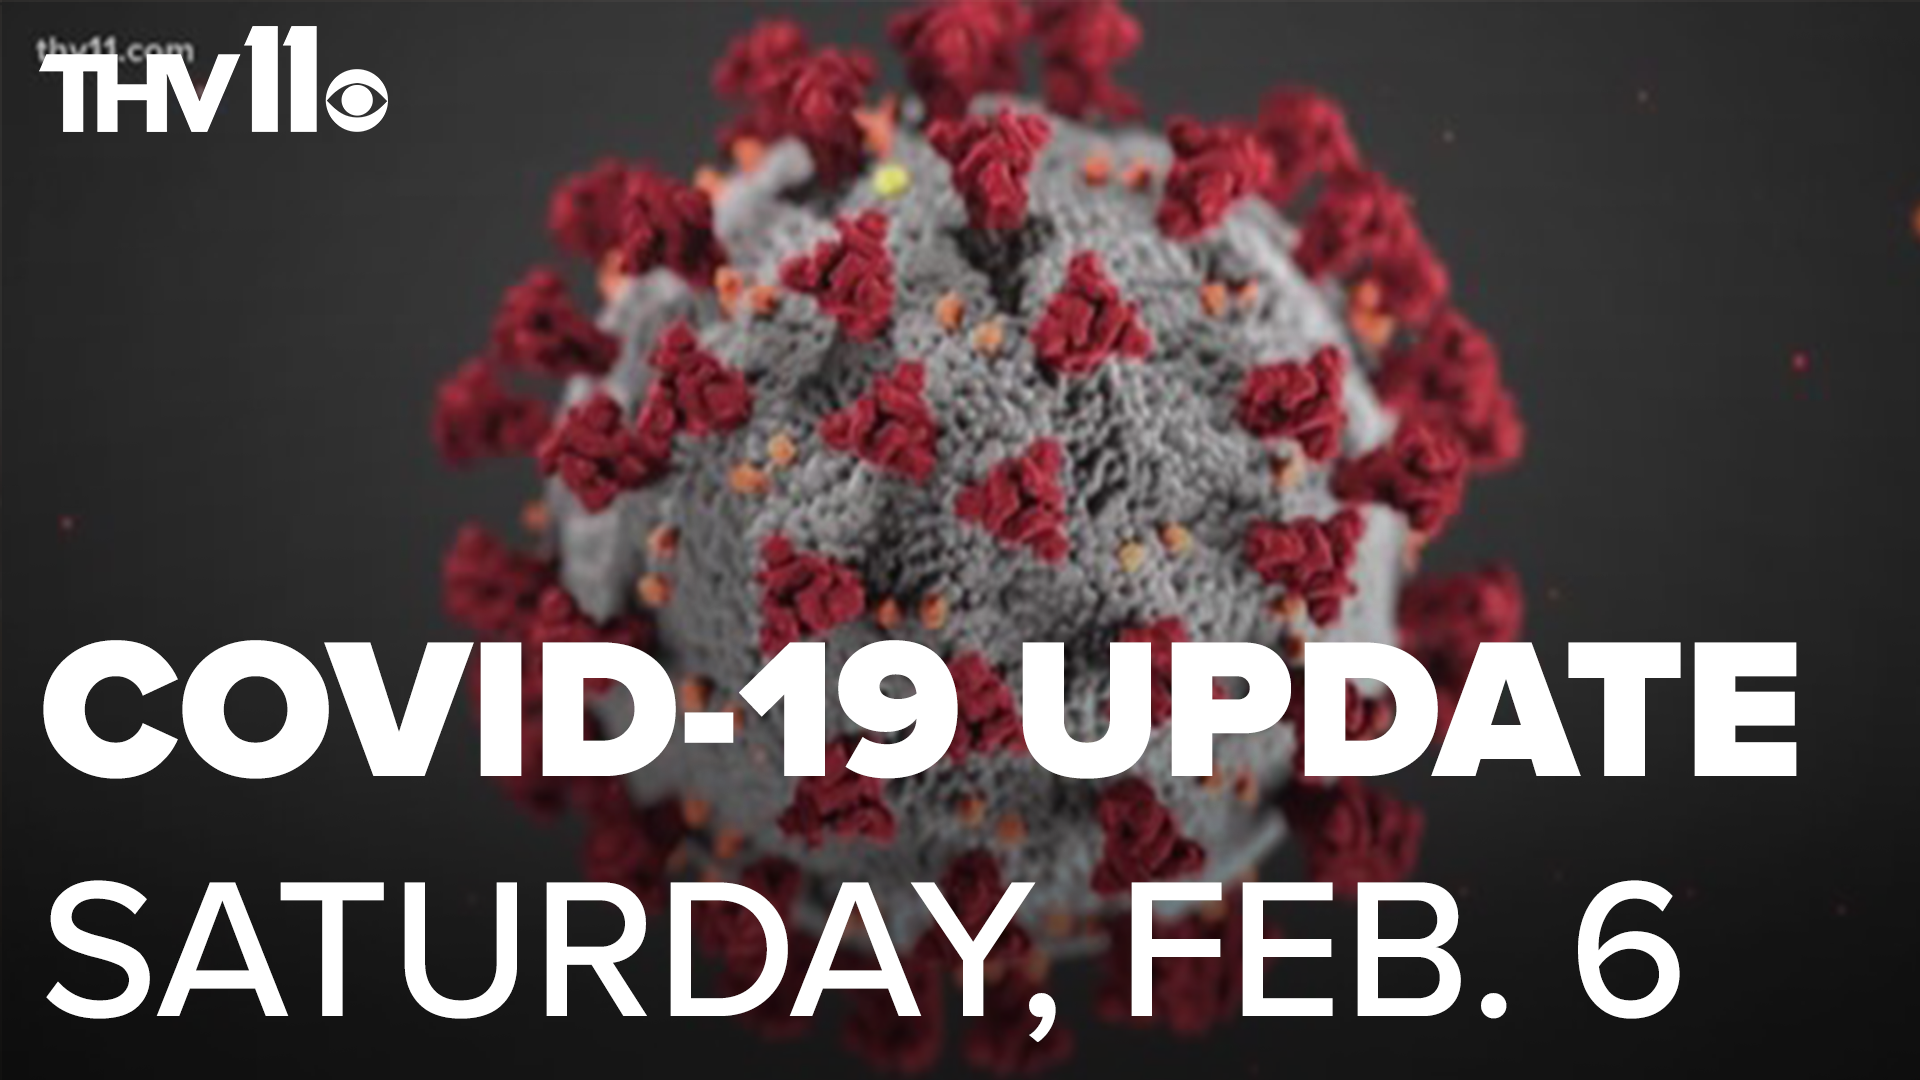 Melissa Zygowicz provides an update on the coronavirus in Arkansas for Saturday, February 6.